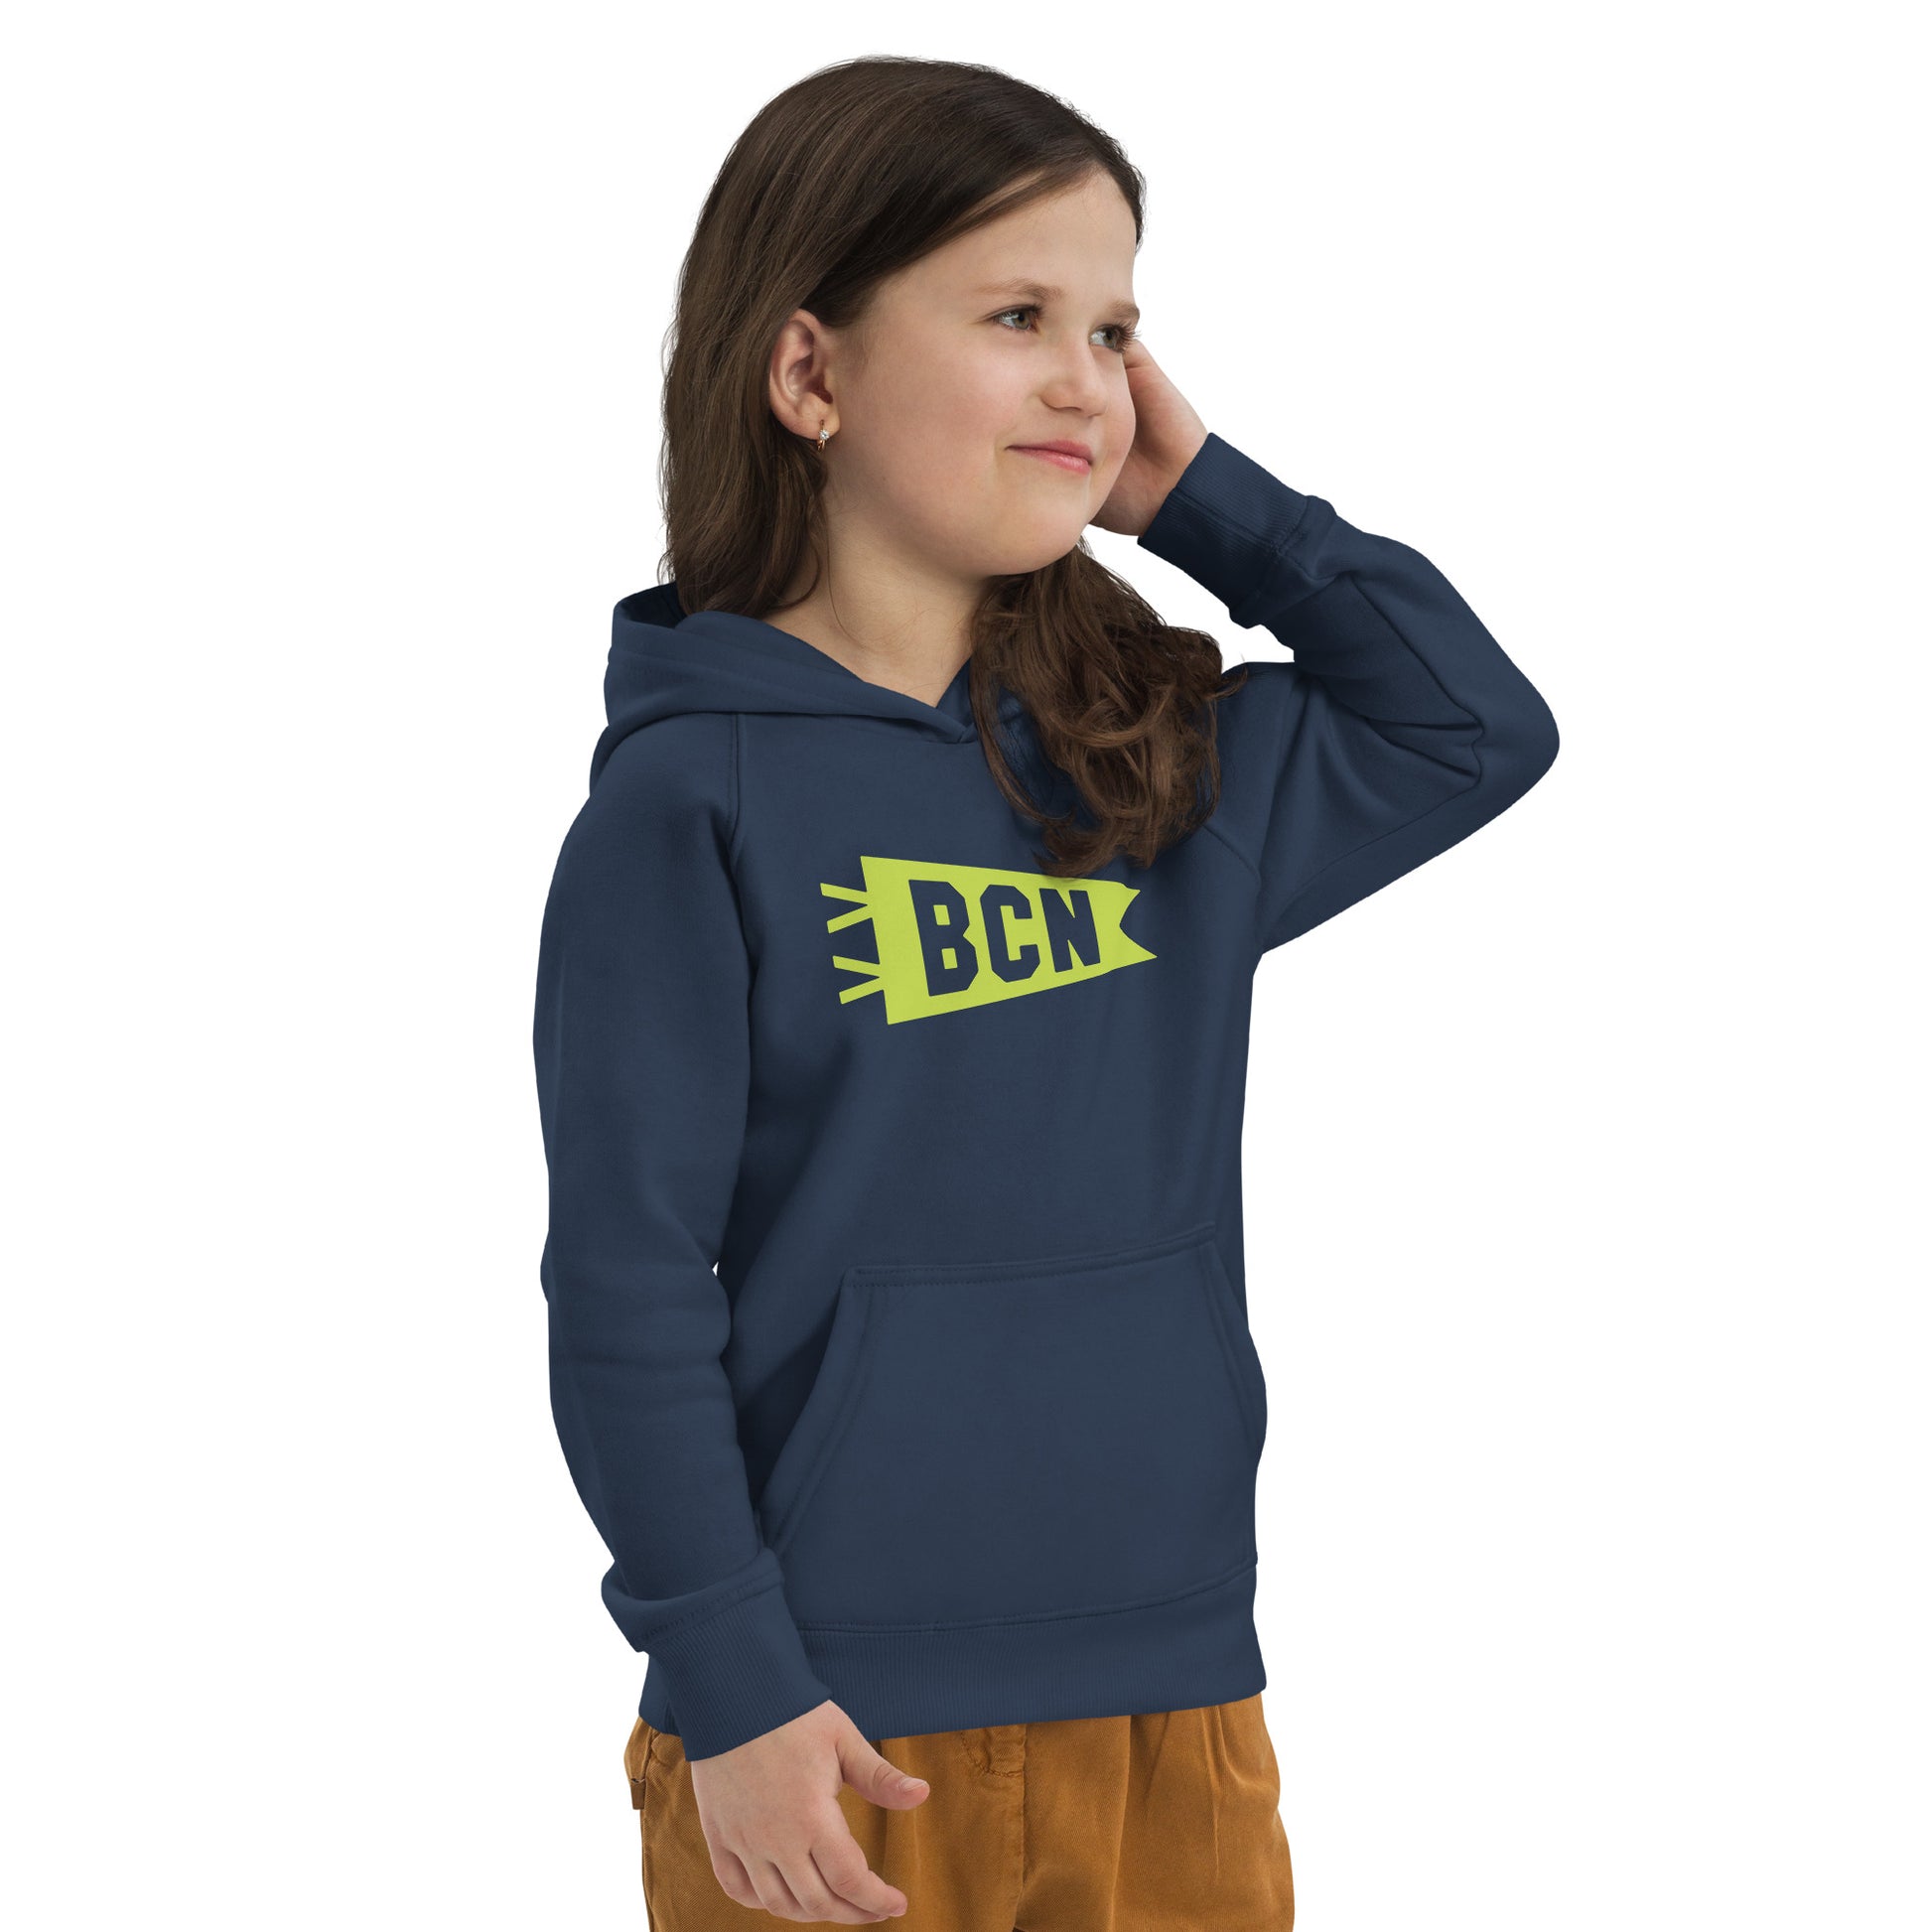 Kid's Sustainable Hoodie - Green Graphic • BCN Barcelona • YHM Designs - Image 06